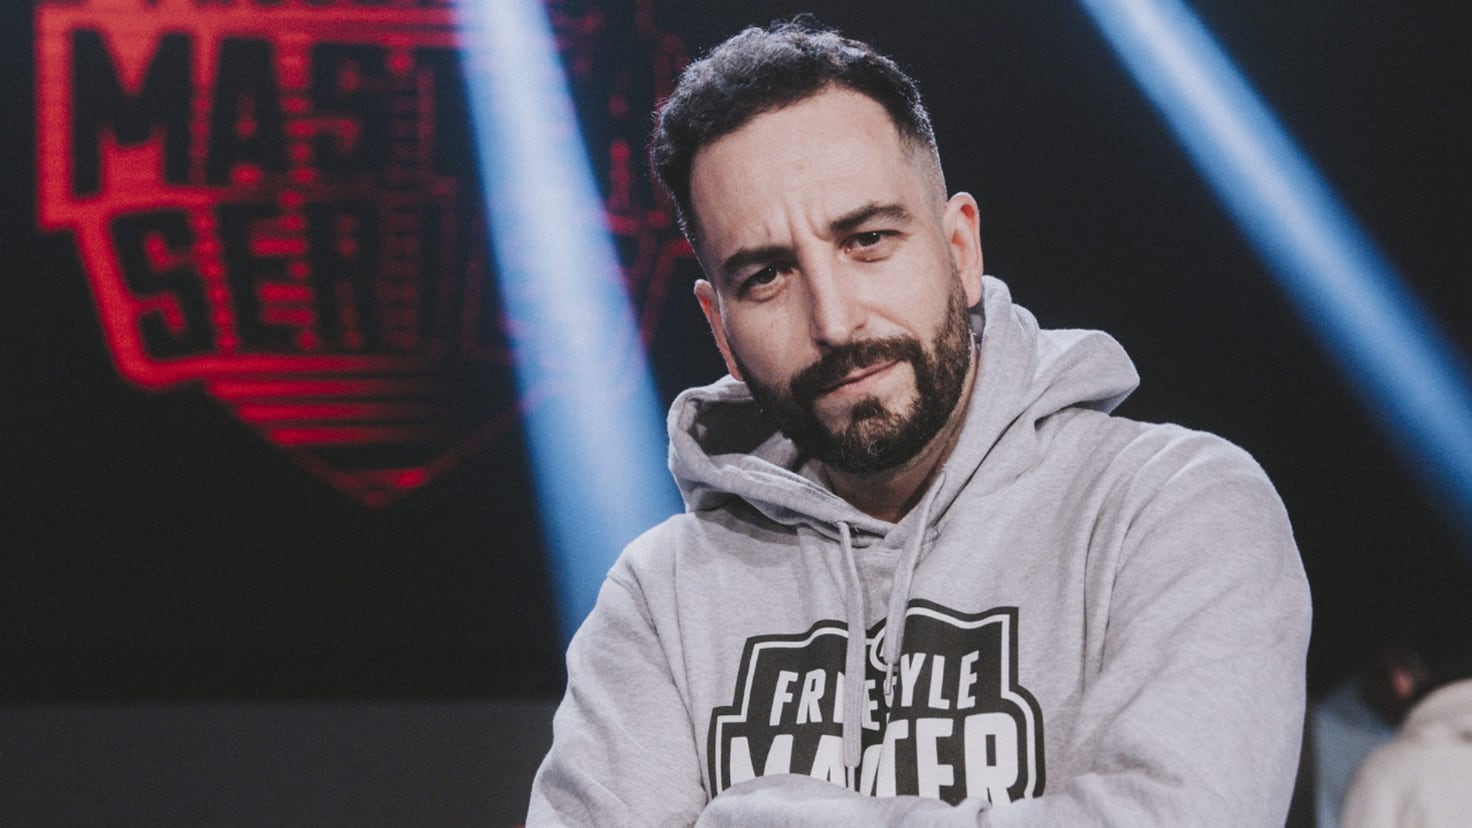 Asier, CEO of Urban Roosters: We must return to the essence and prioritize the show instead of the big stages
